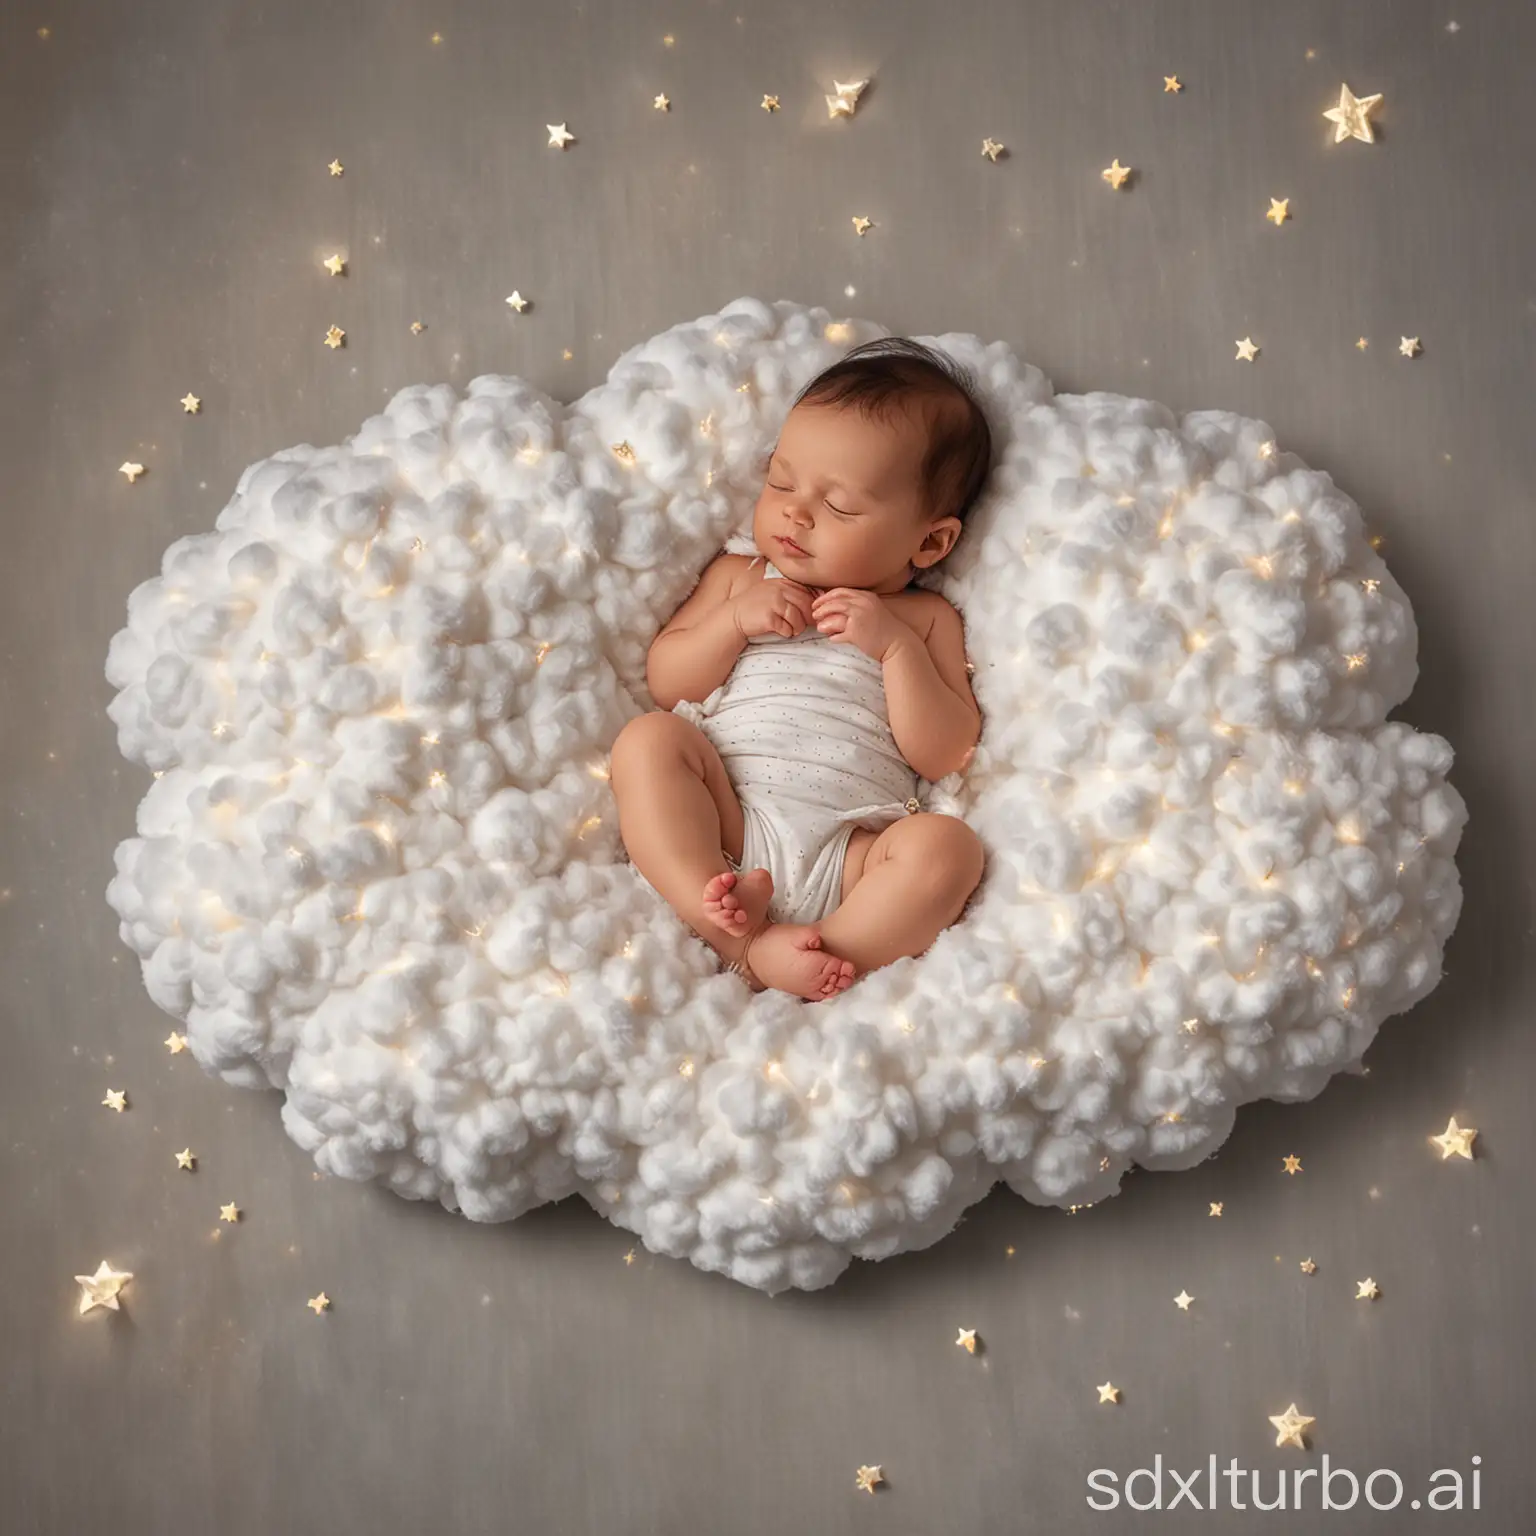 Baby-Sleeping-on-Fluffy-Cloud-Pillow-with-Dancing-Star-Sparks